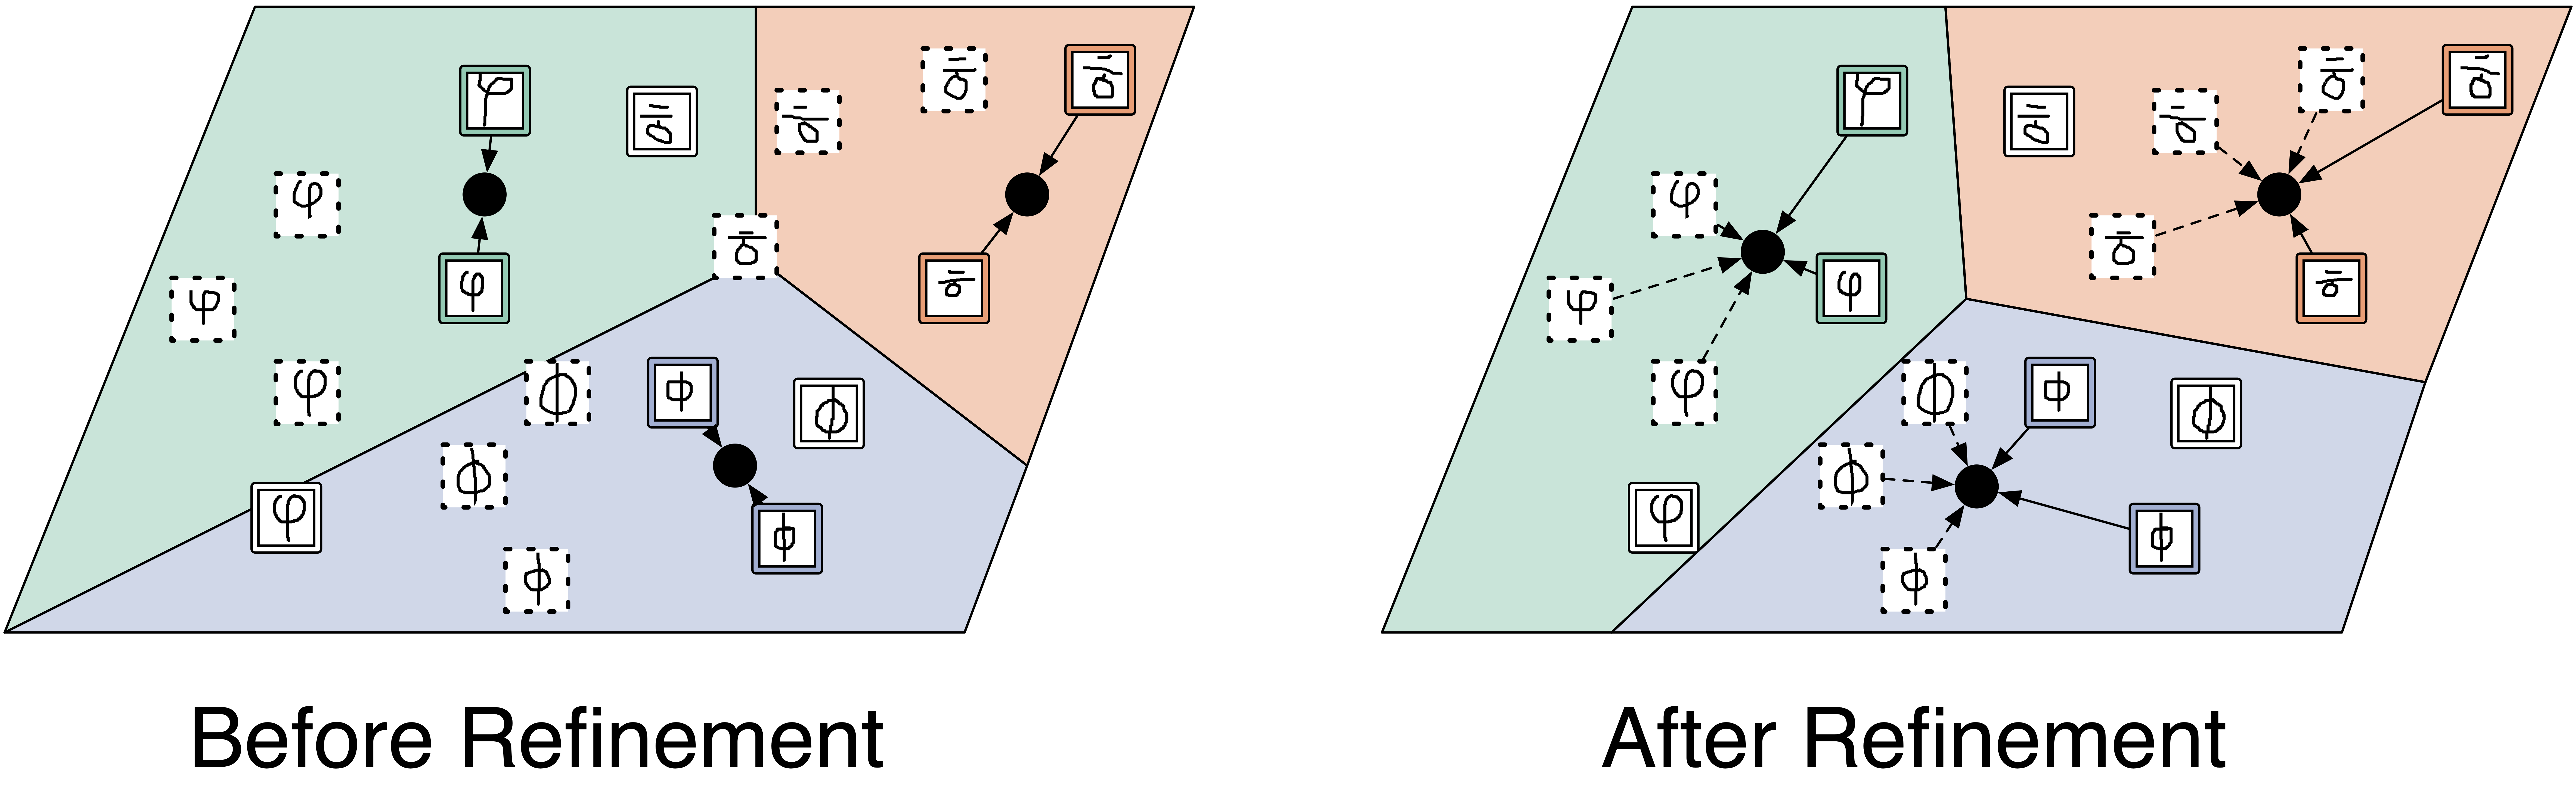 Left: The prototypes are initialized based on the mean location of the examples of the corresponding class, as in ordinary Prototypical Networks. Support, unlabeled, and query examples have solid, dashed, and white colored borders respectively. Right: The refined prototypes obtained by incorporating the unlabeled examples, which classifies all query examples correctly.